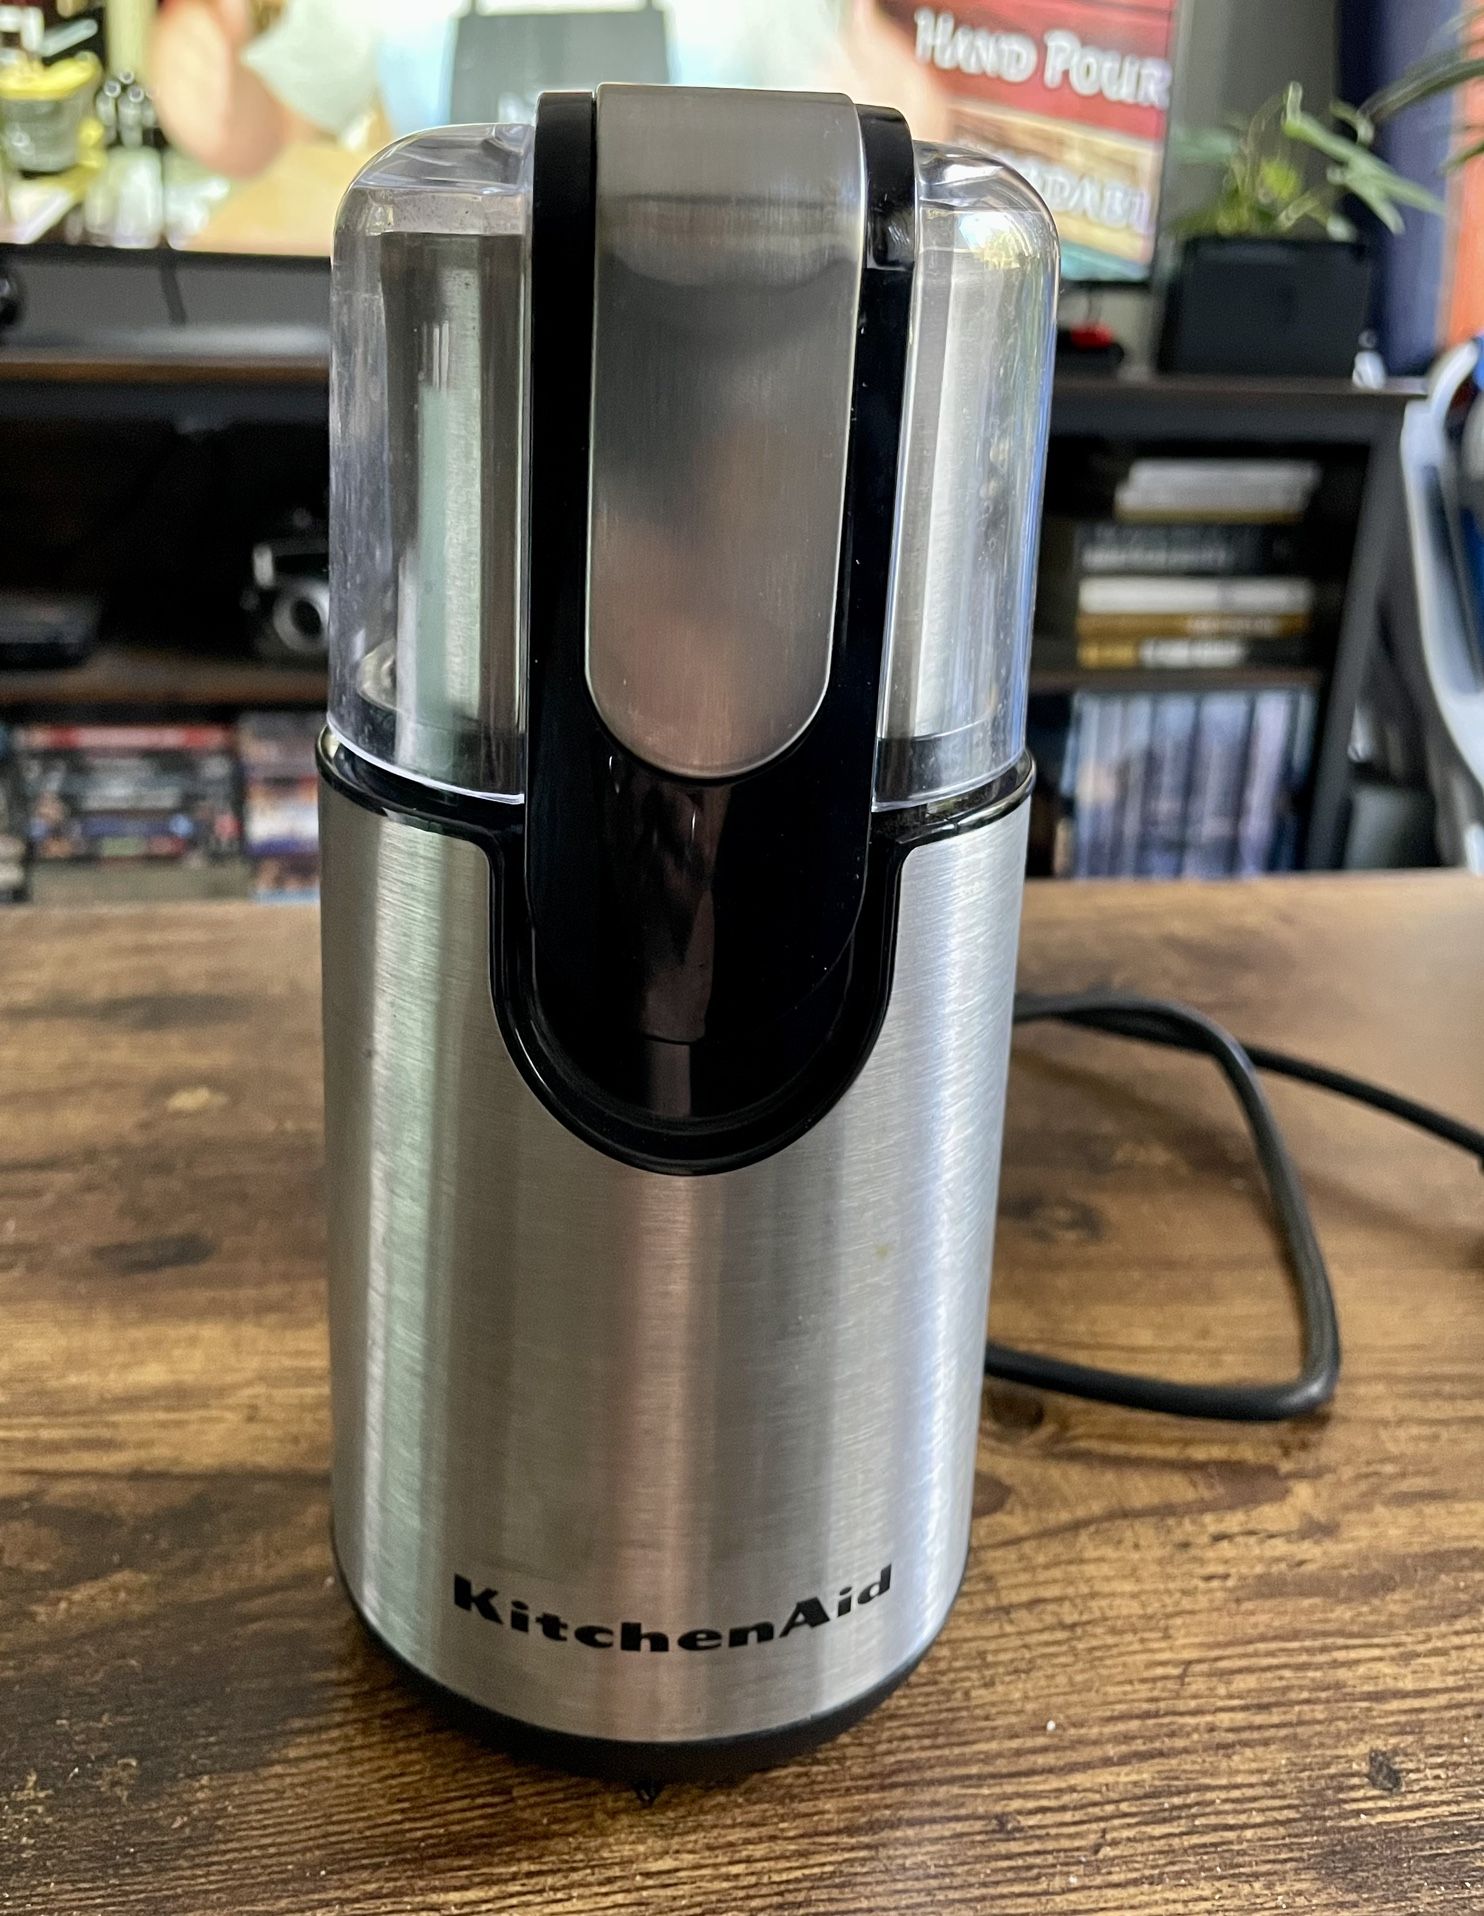 KitchenAid Blade Coffee and Spice Grinder Combo Pack for Sale in Dublin, CA  - OfferUp